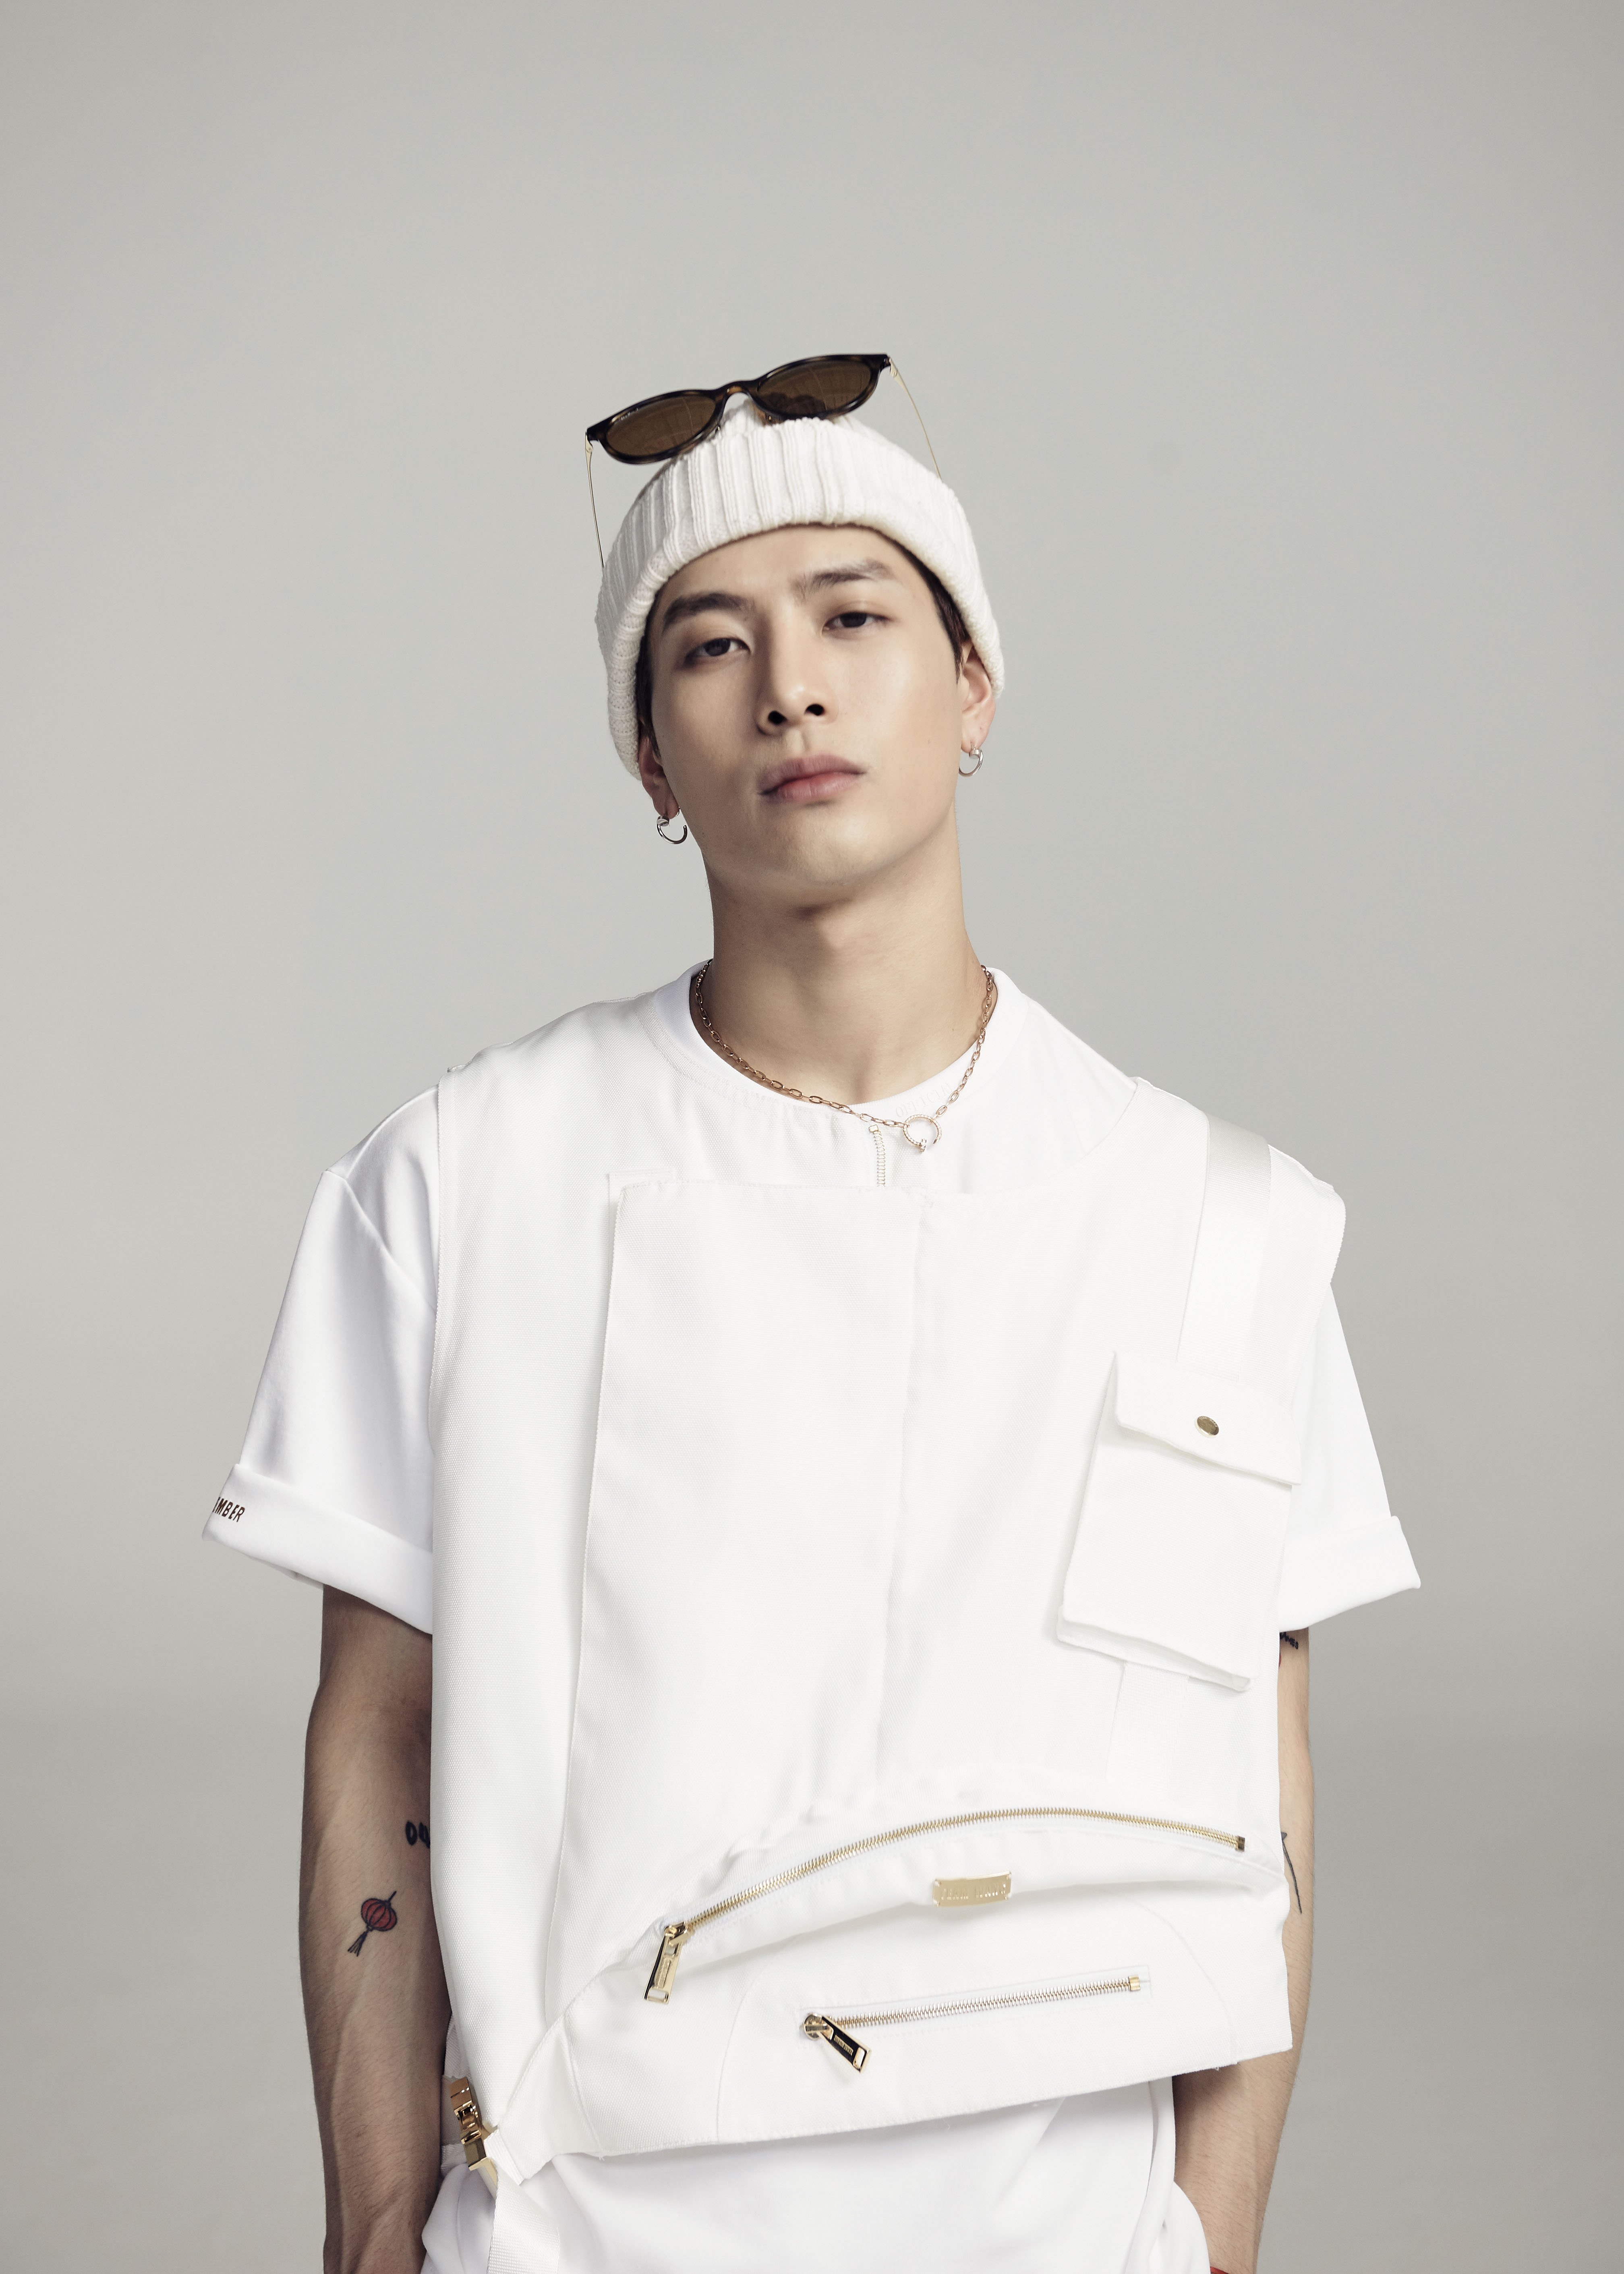 Jackson Wang in all white clothes